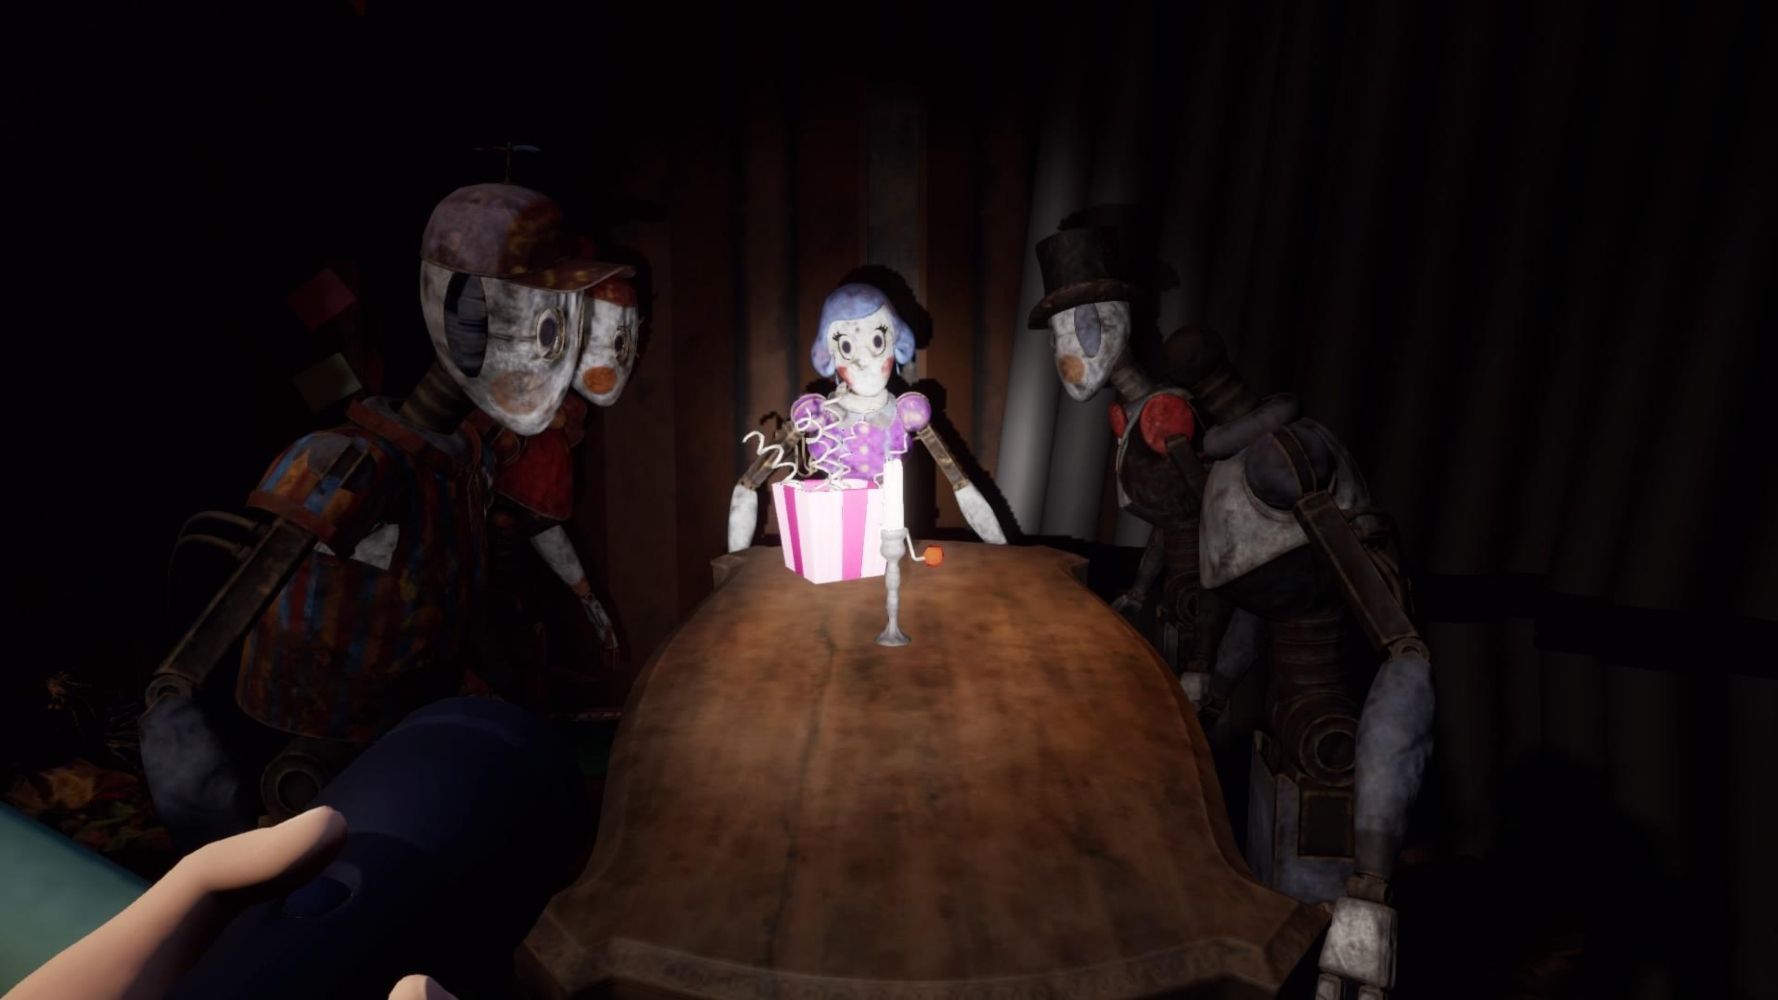 Five dressed up staff bots sit around a dining table, though one is missing its head.